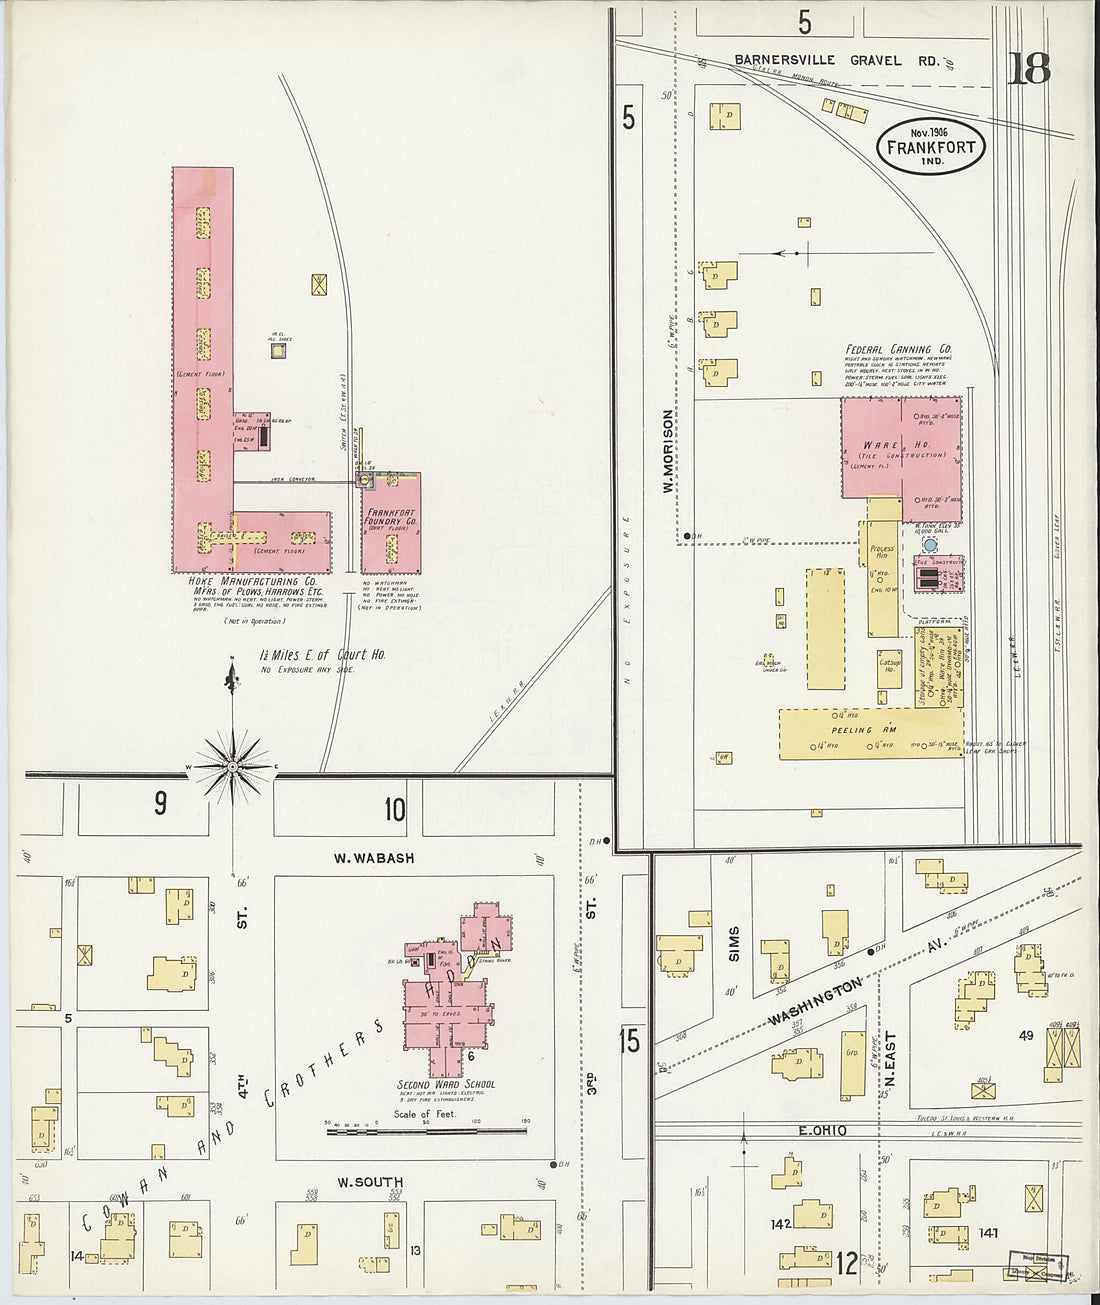 This old map of Frankfort, Clinton County, Indiana was created by Sanborn Map Company in 1906